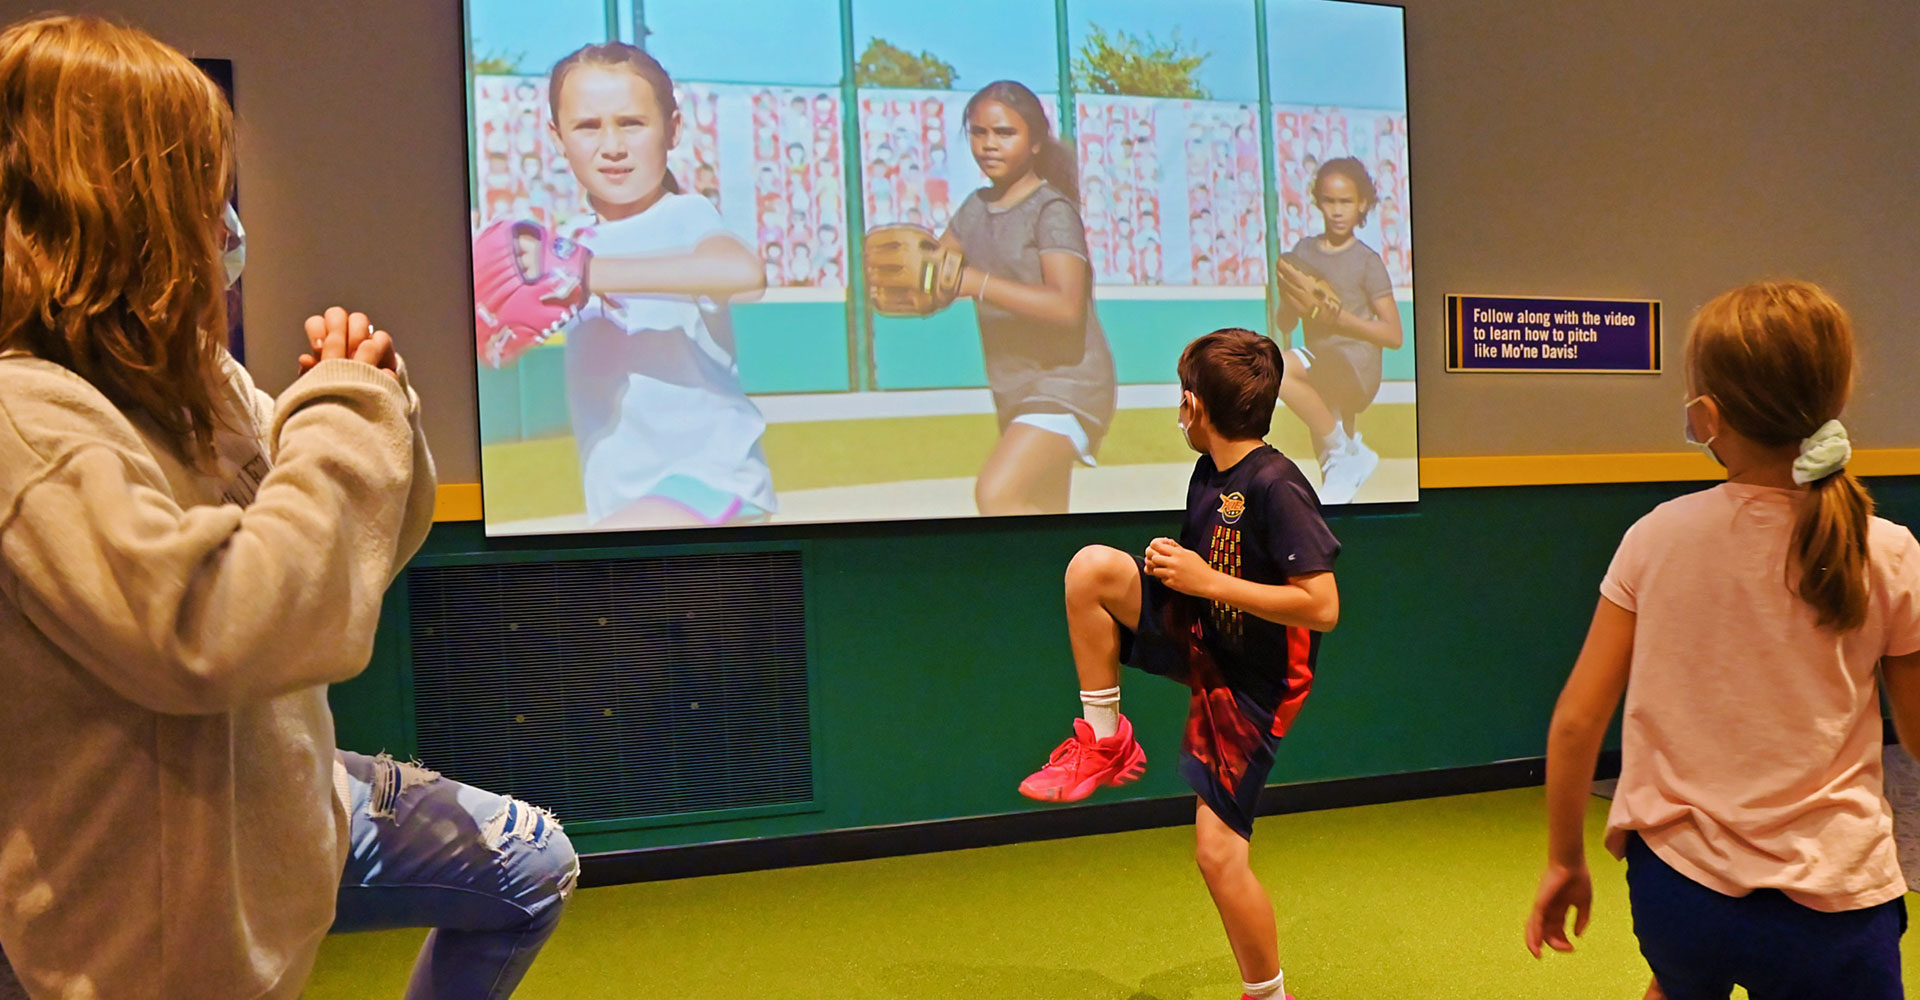 Children learning how to pitch in the Baseball Boundary Breakers exhibit.